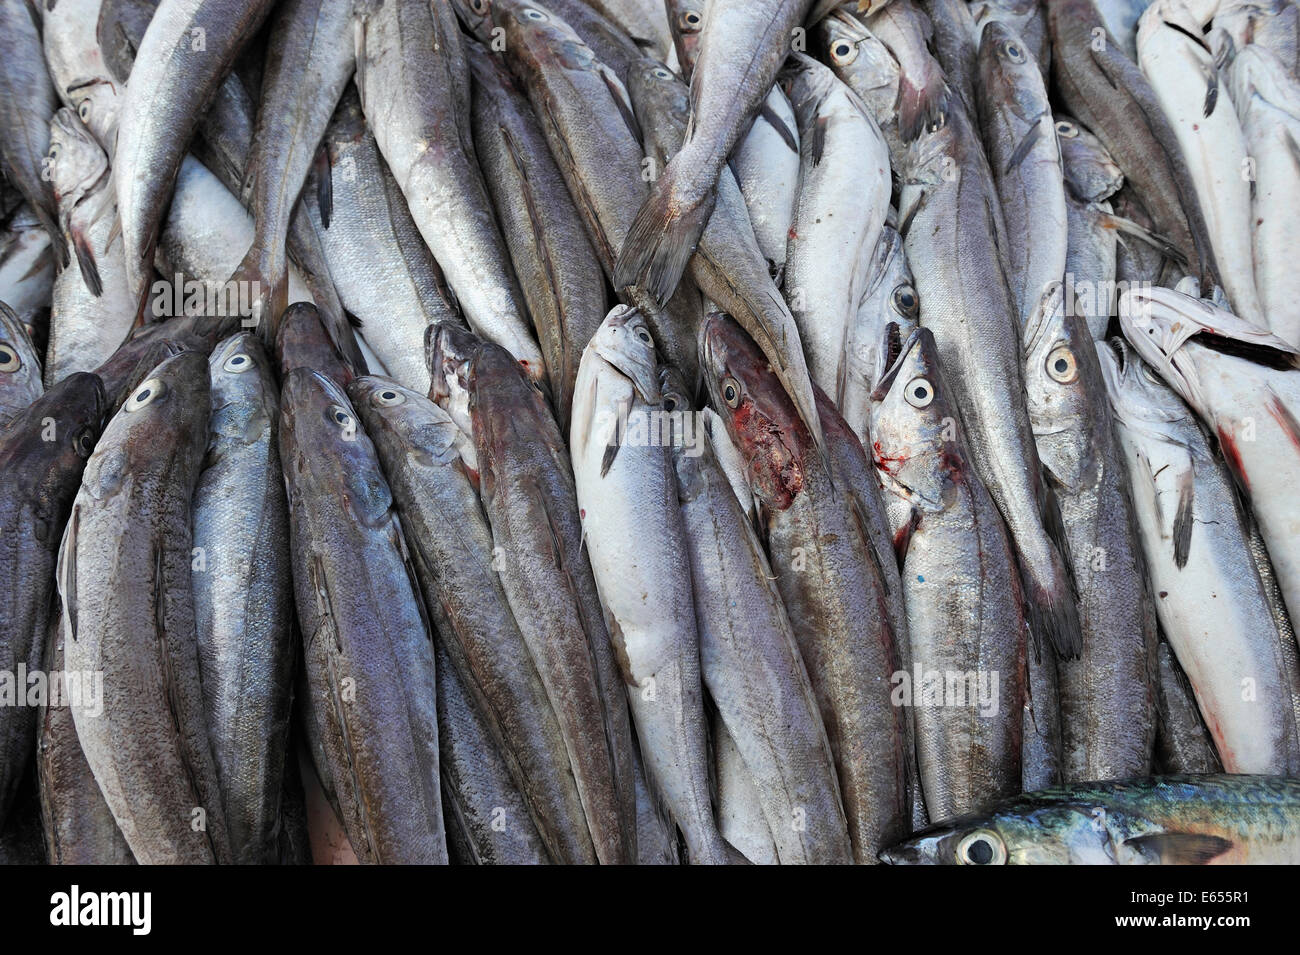 Fish for sale on a market stall Stock Photo